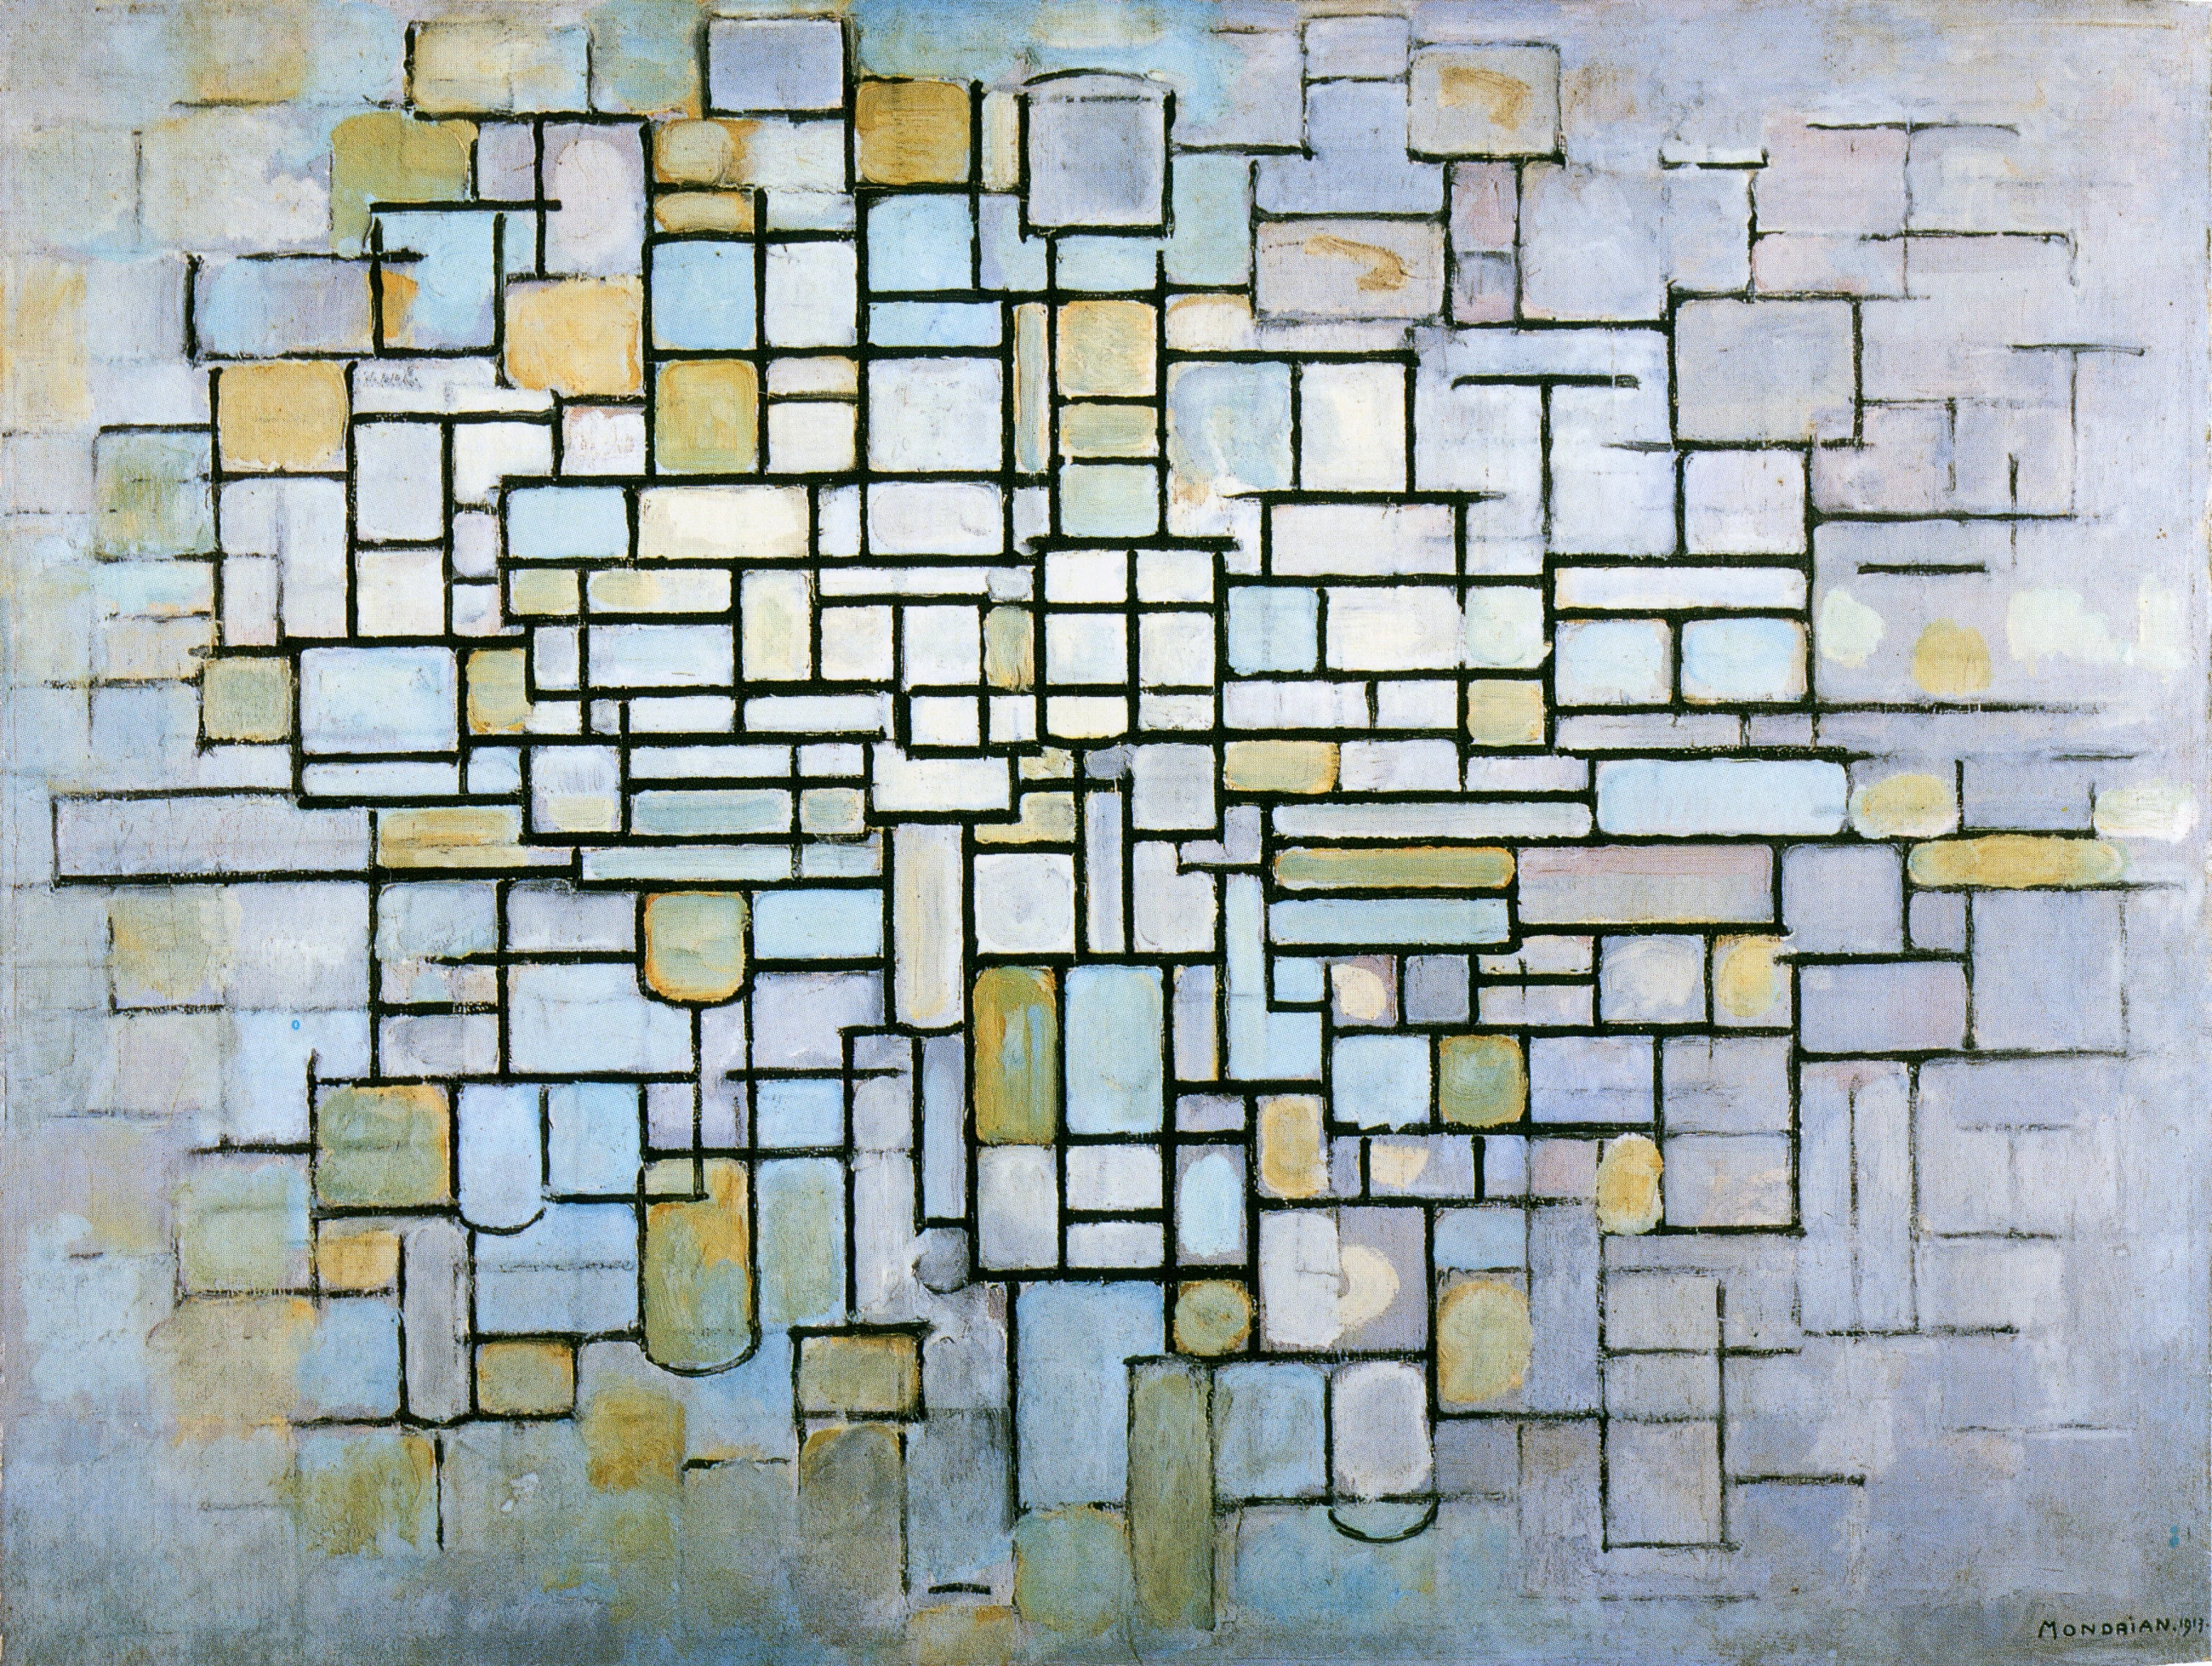 Composition in Blue Gray and Pink, Piet Mondrian